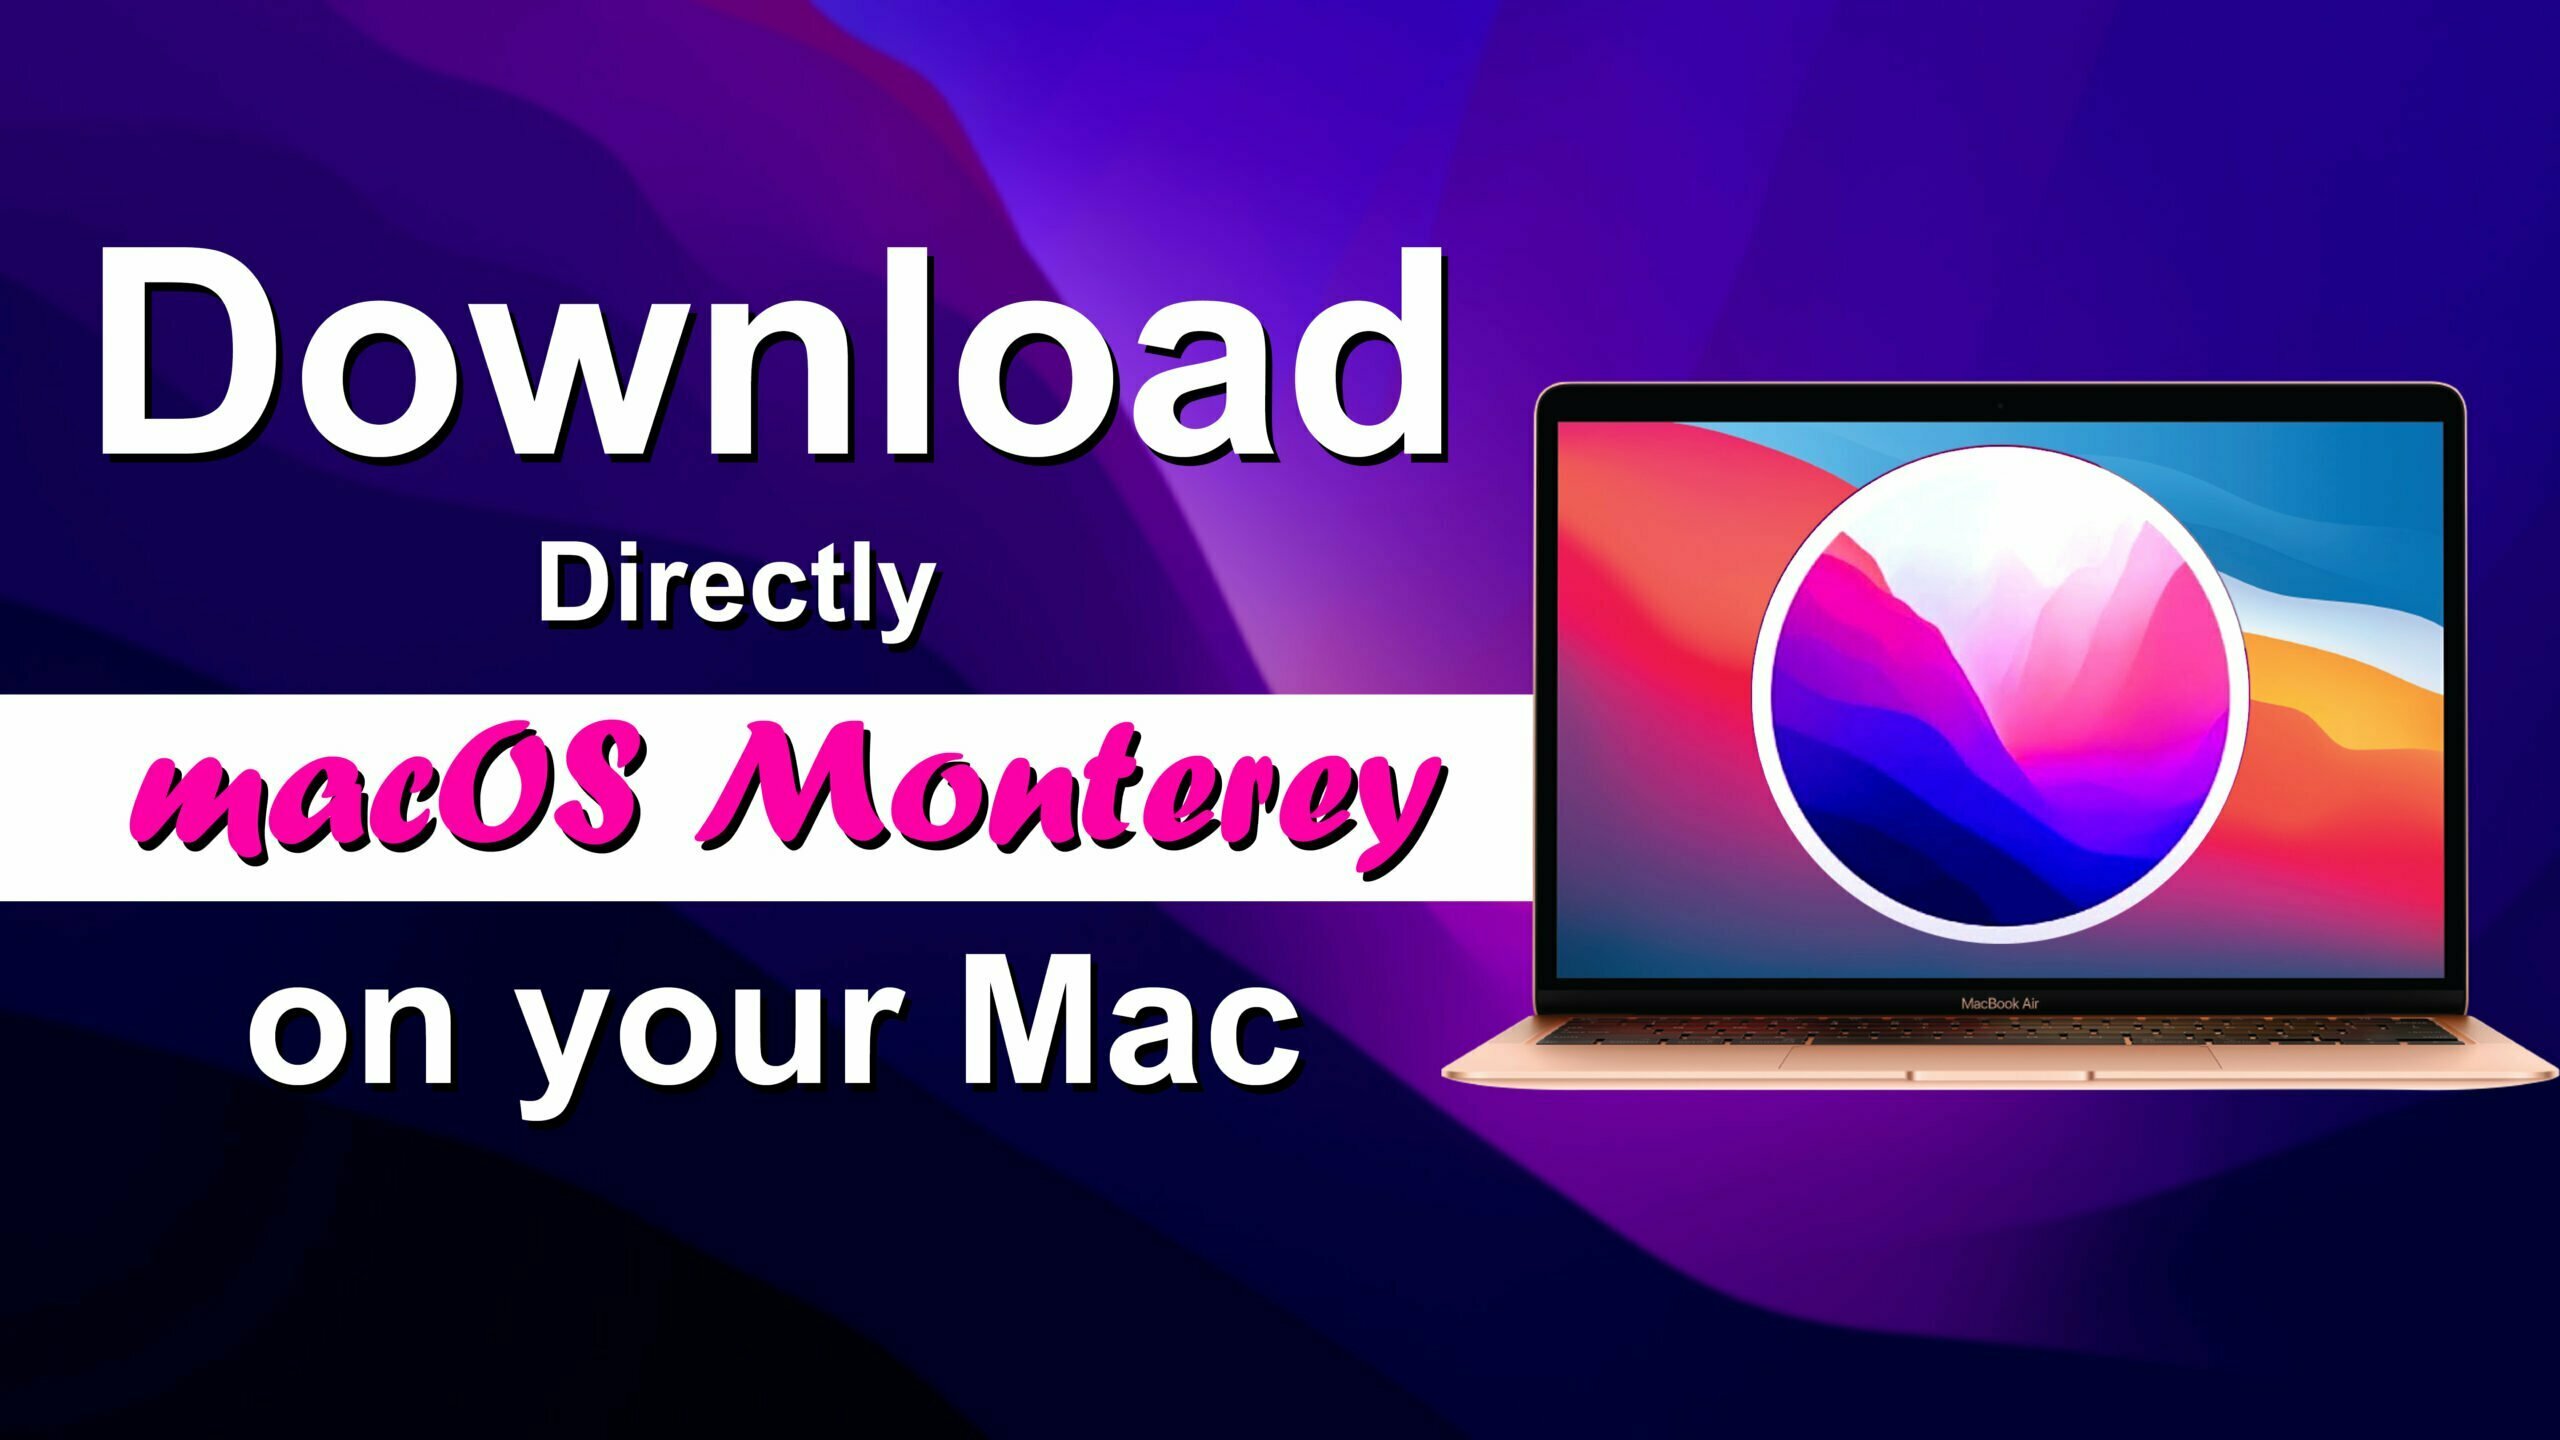 How to Directly Download macOS Monterey on Your Mac?